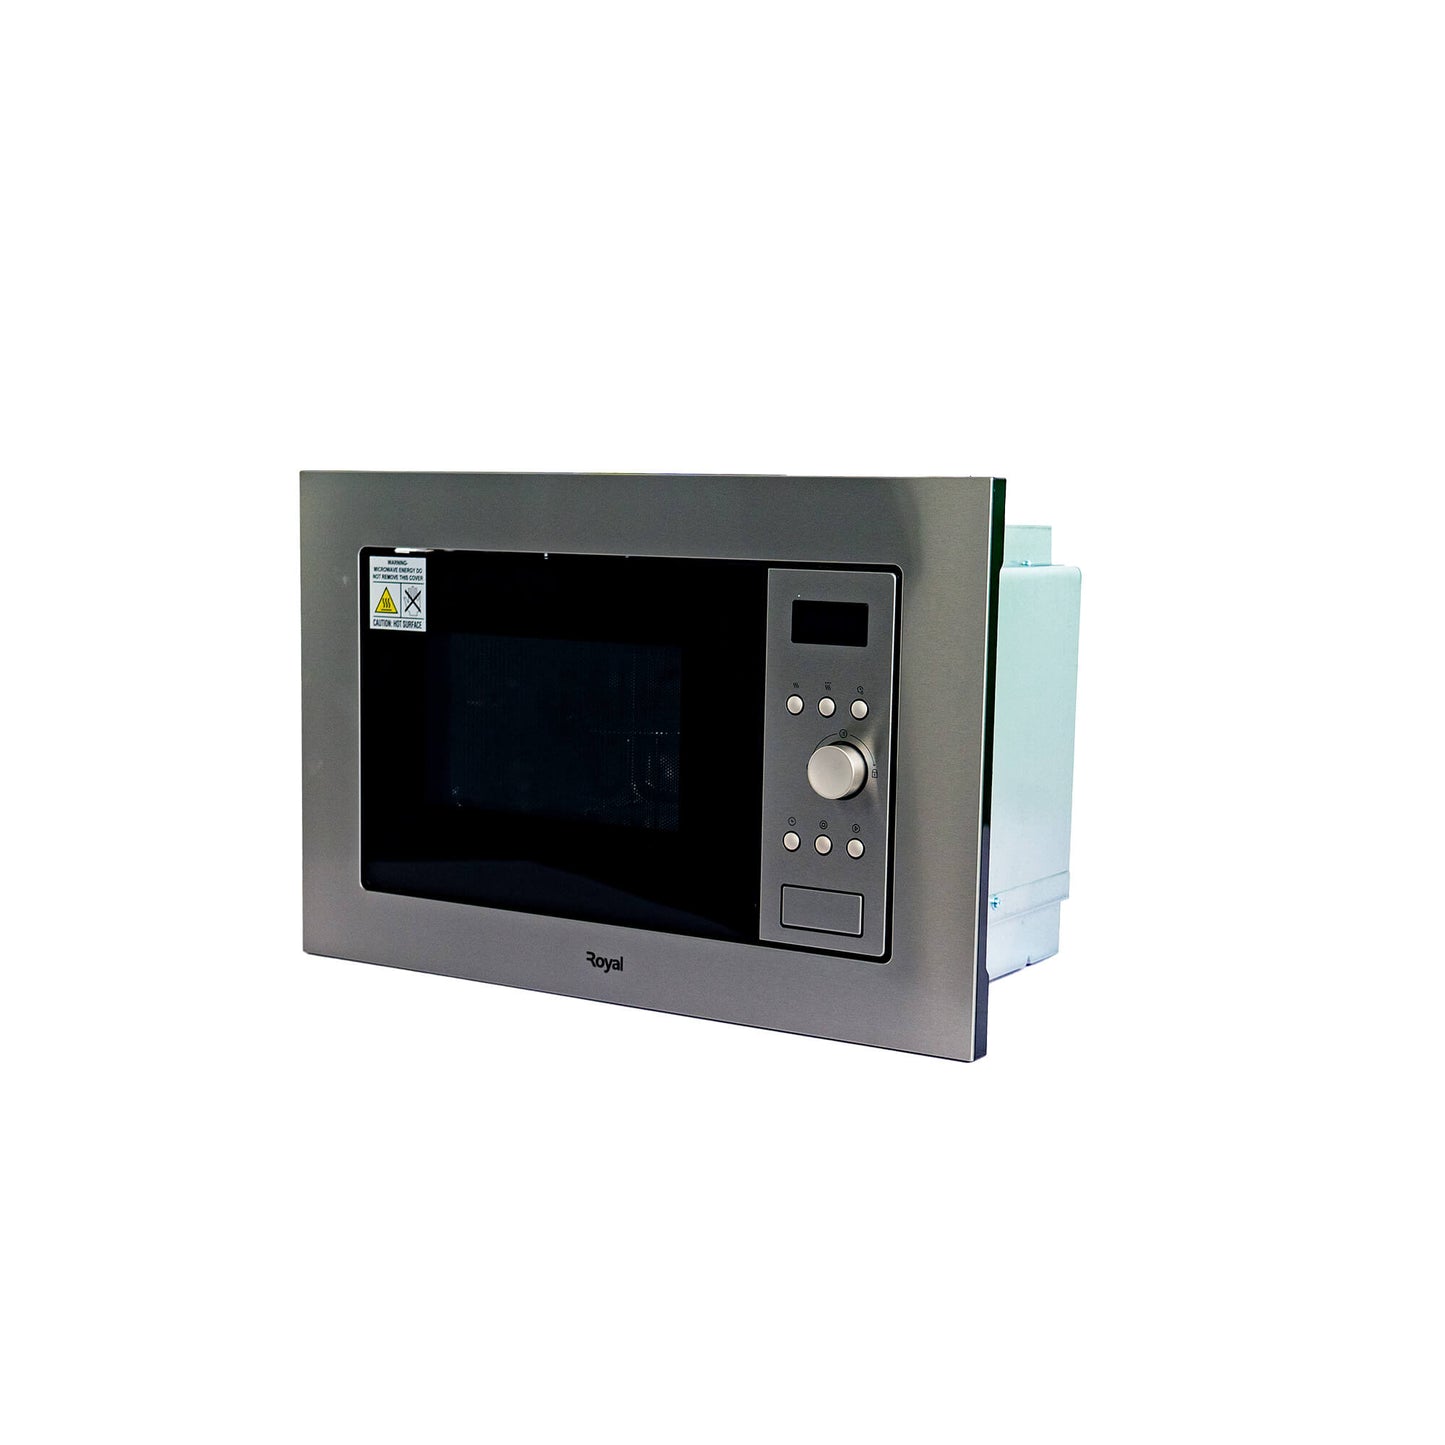 Royal 25-Litre Built-In Microwave Oven RBIMW25S